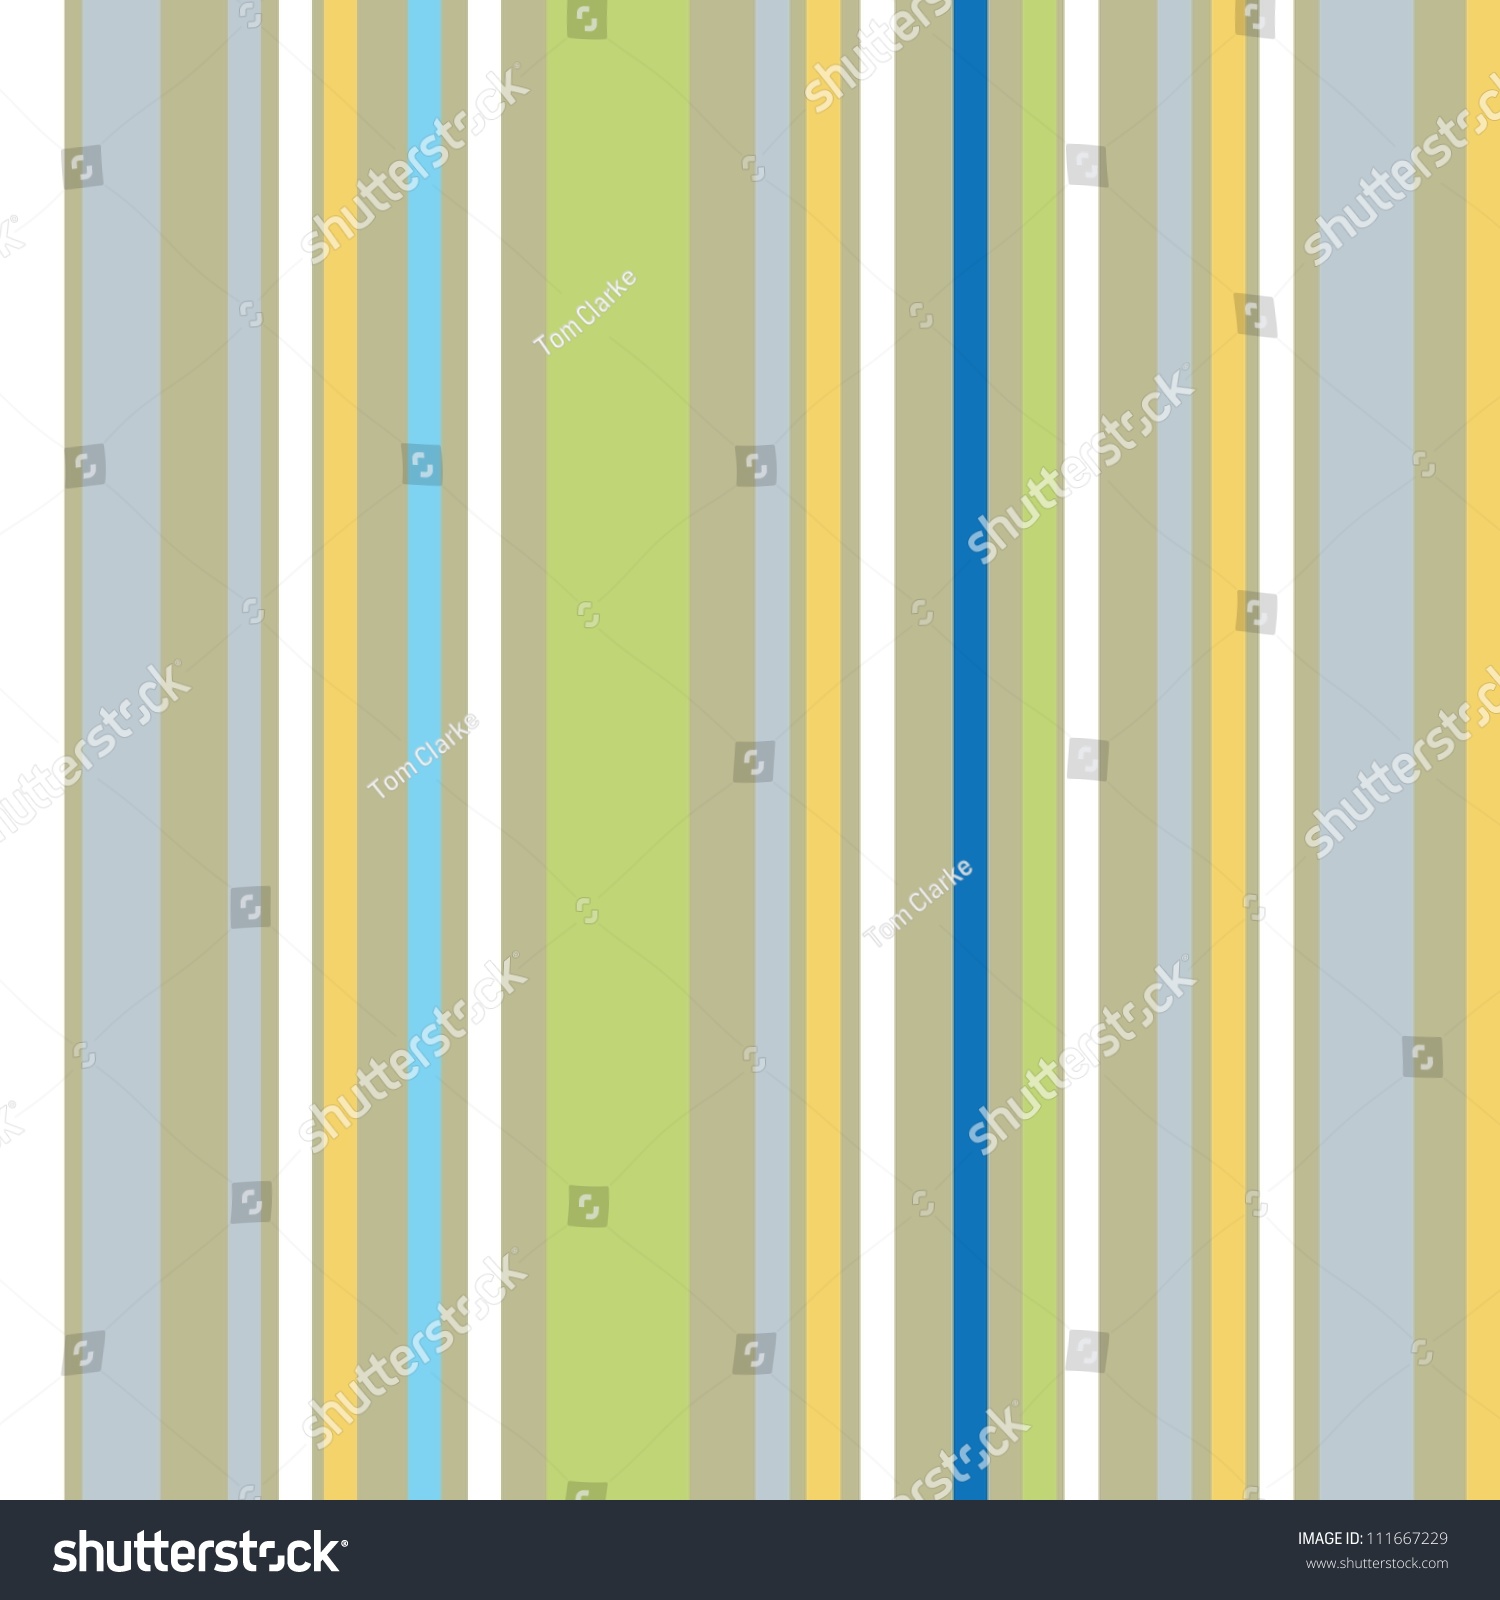 Subdued Color Surface Design Stock Photo 111667229 : Shutterstock